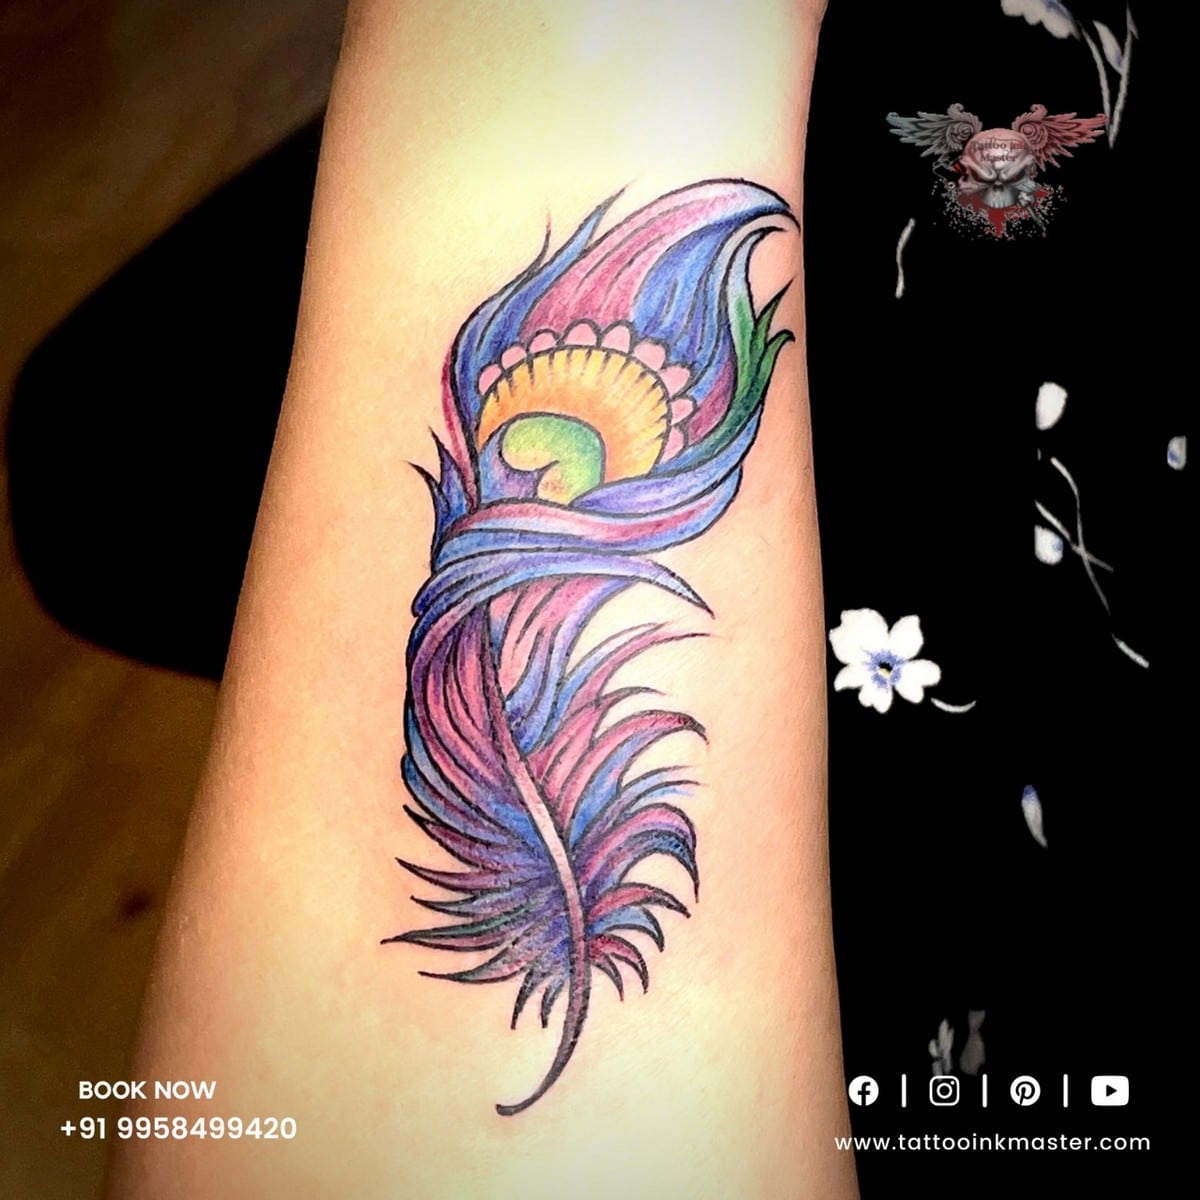 peacock feather tattoo small | Tattoo Ink Master